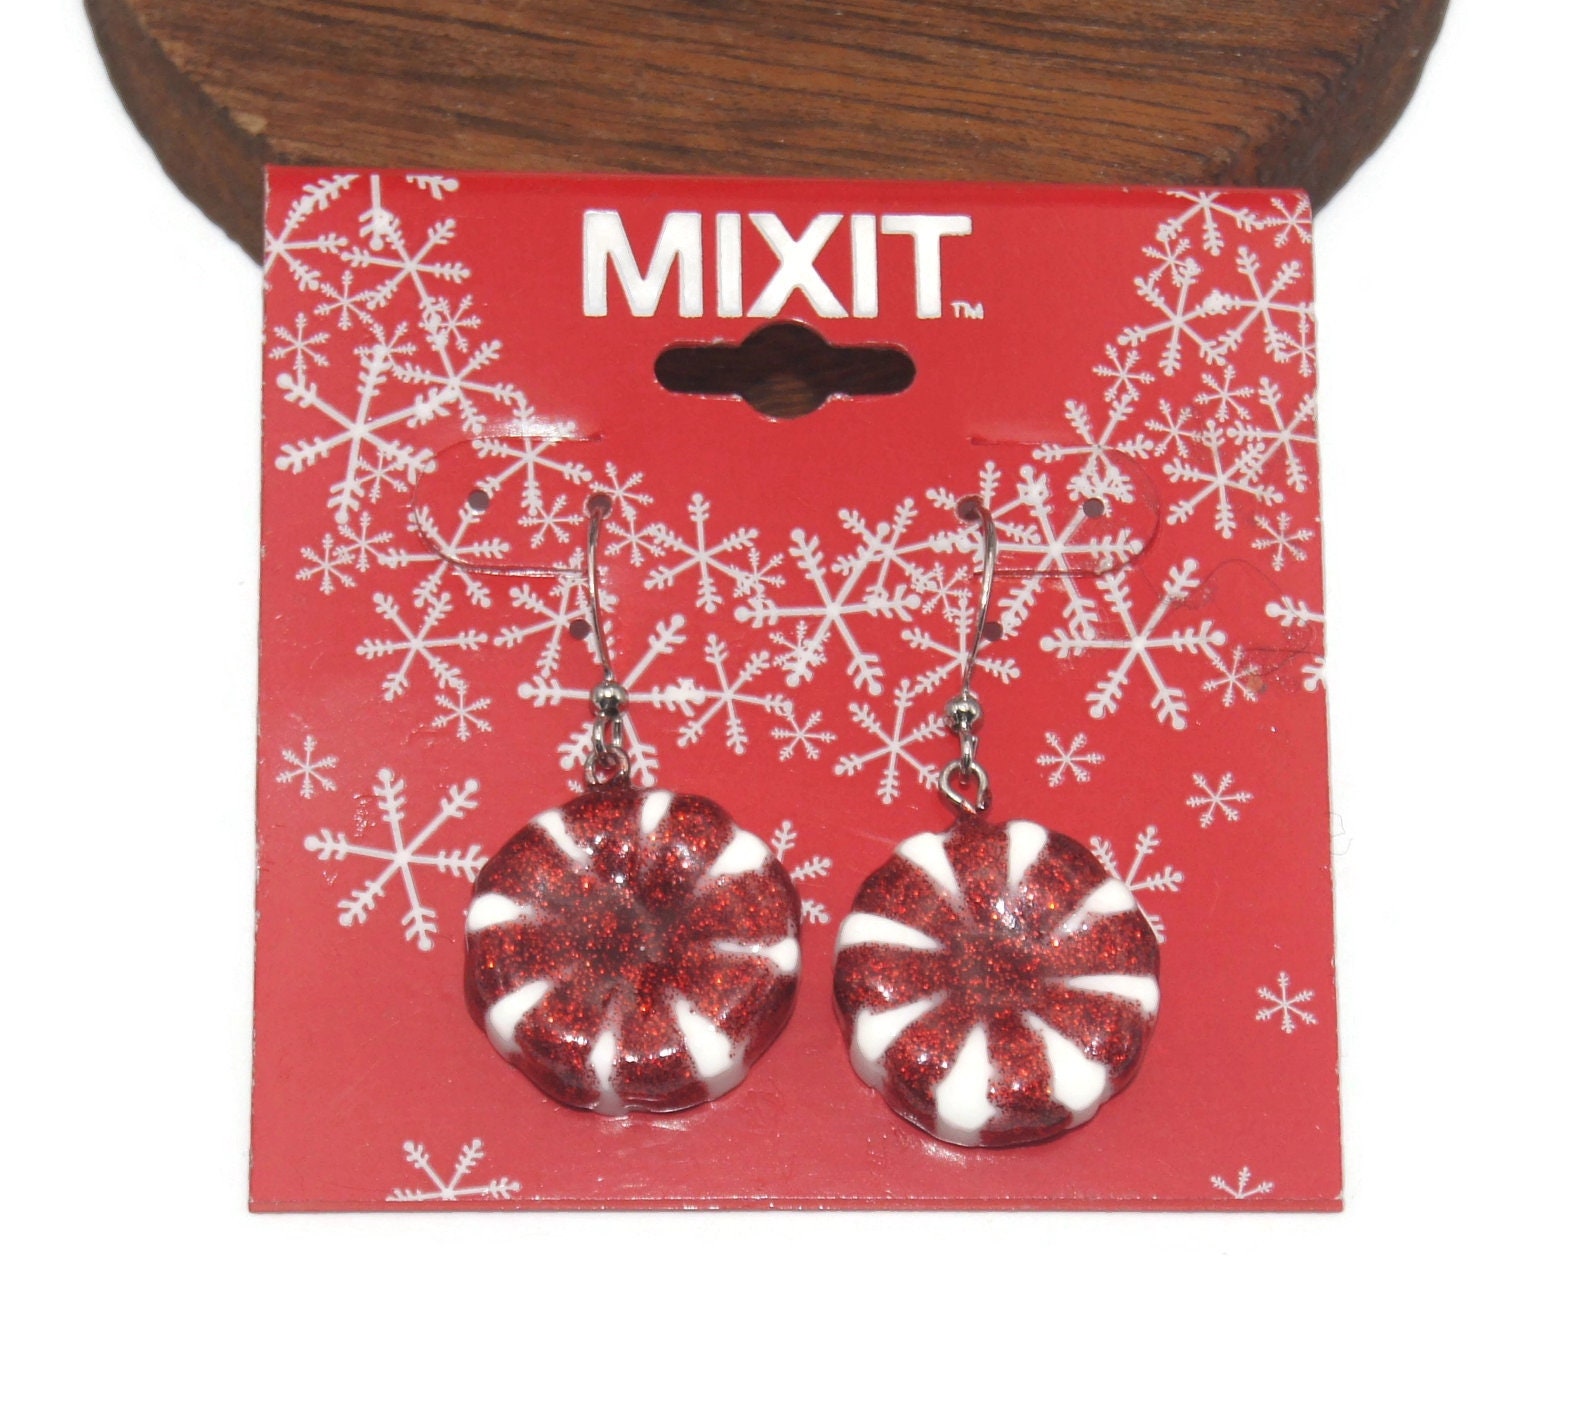 Mixit Earring Backs, One Size , Multiple Colors